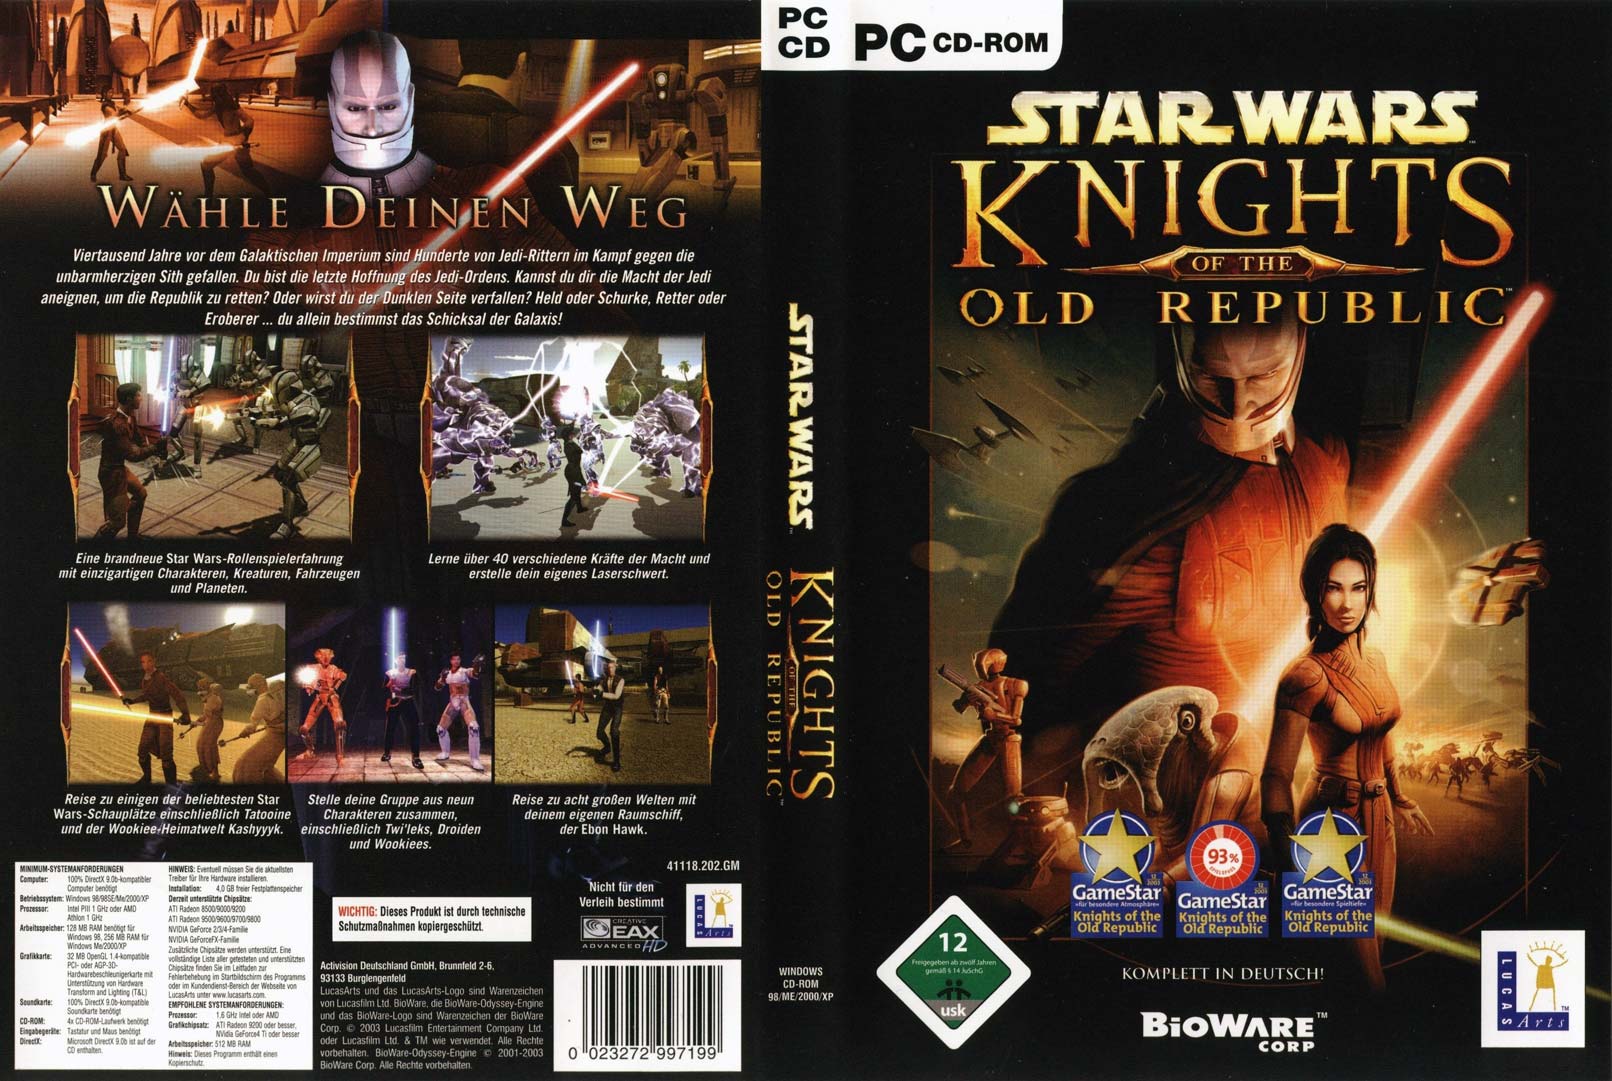 Star wars knights of the old republic русификатор для steam фото 107